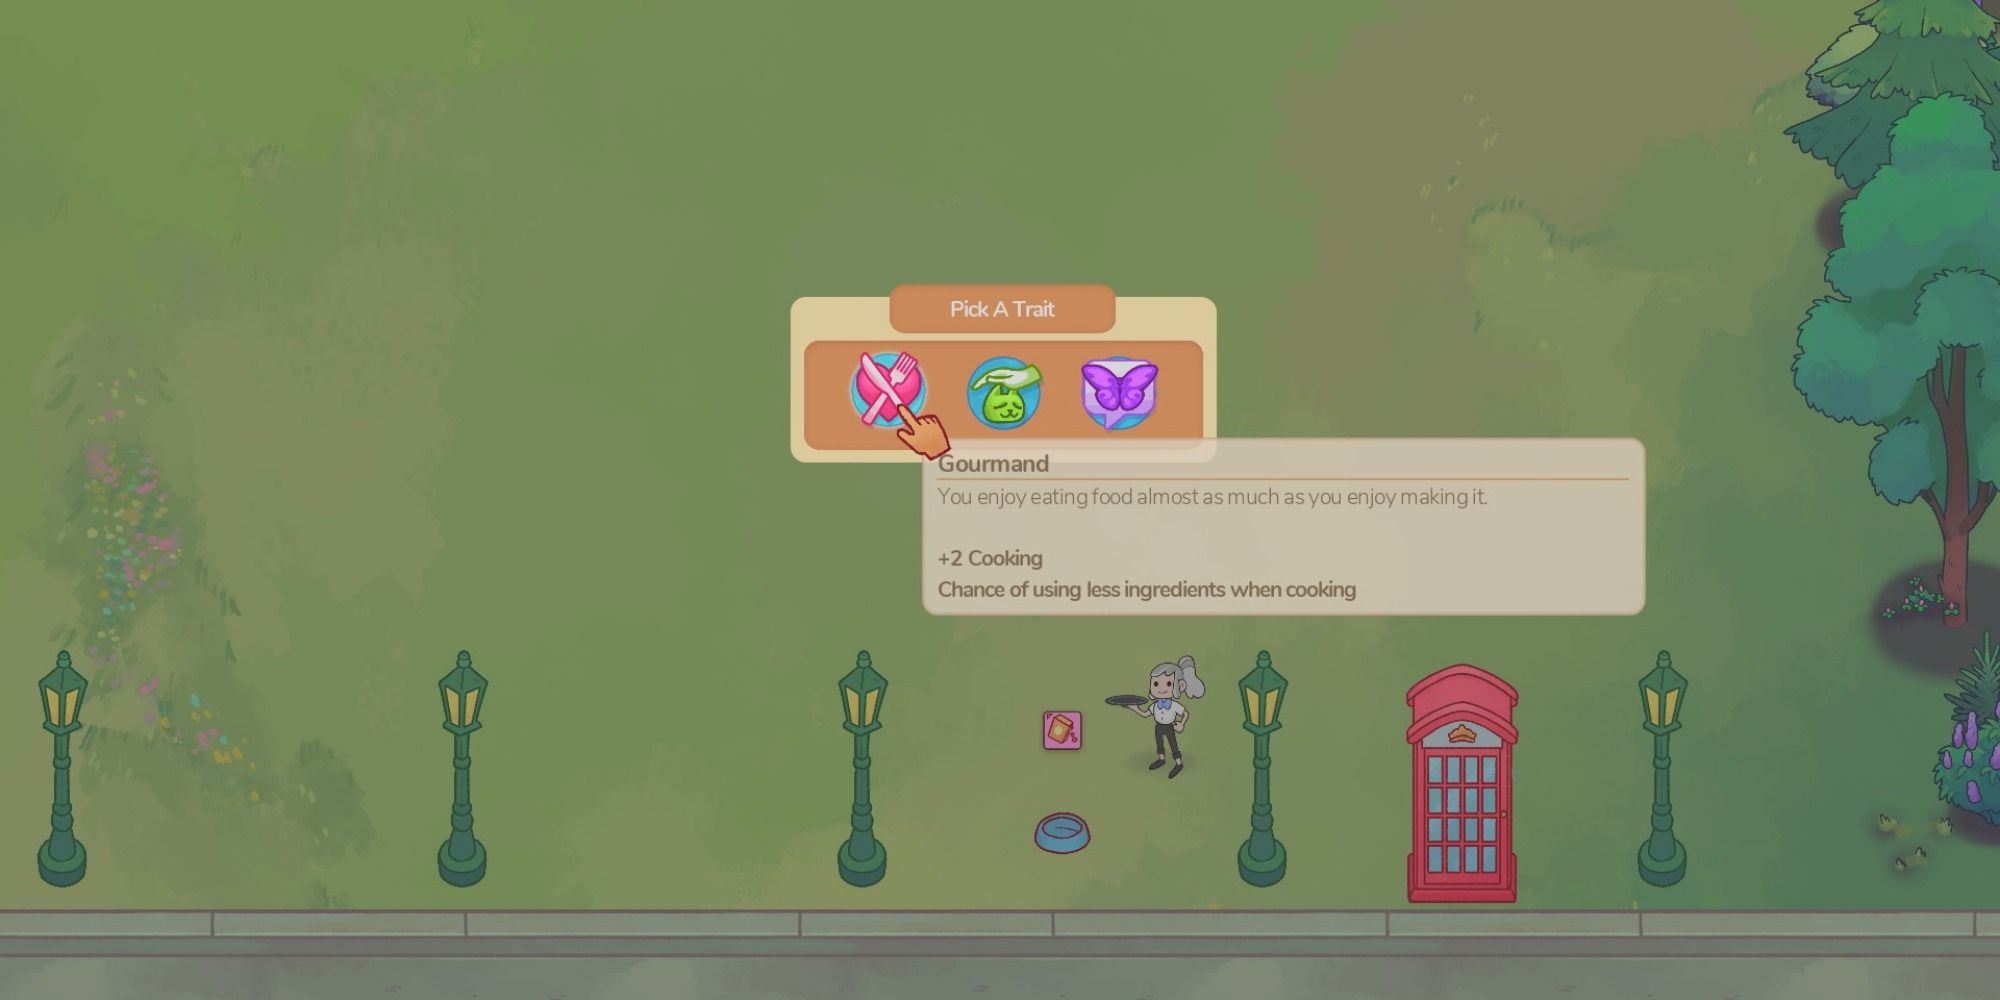 Pick a trait bubble appears above empty field with three choices